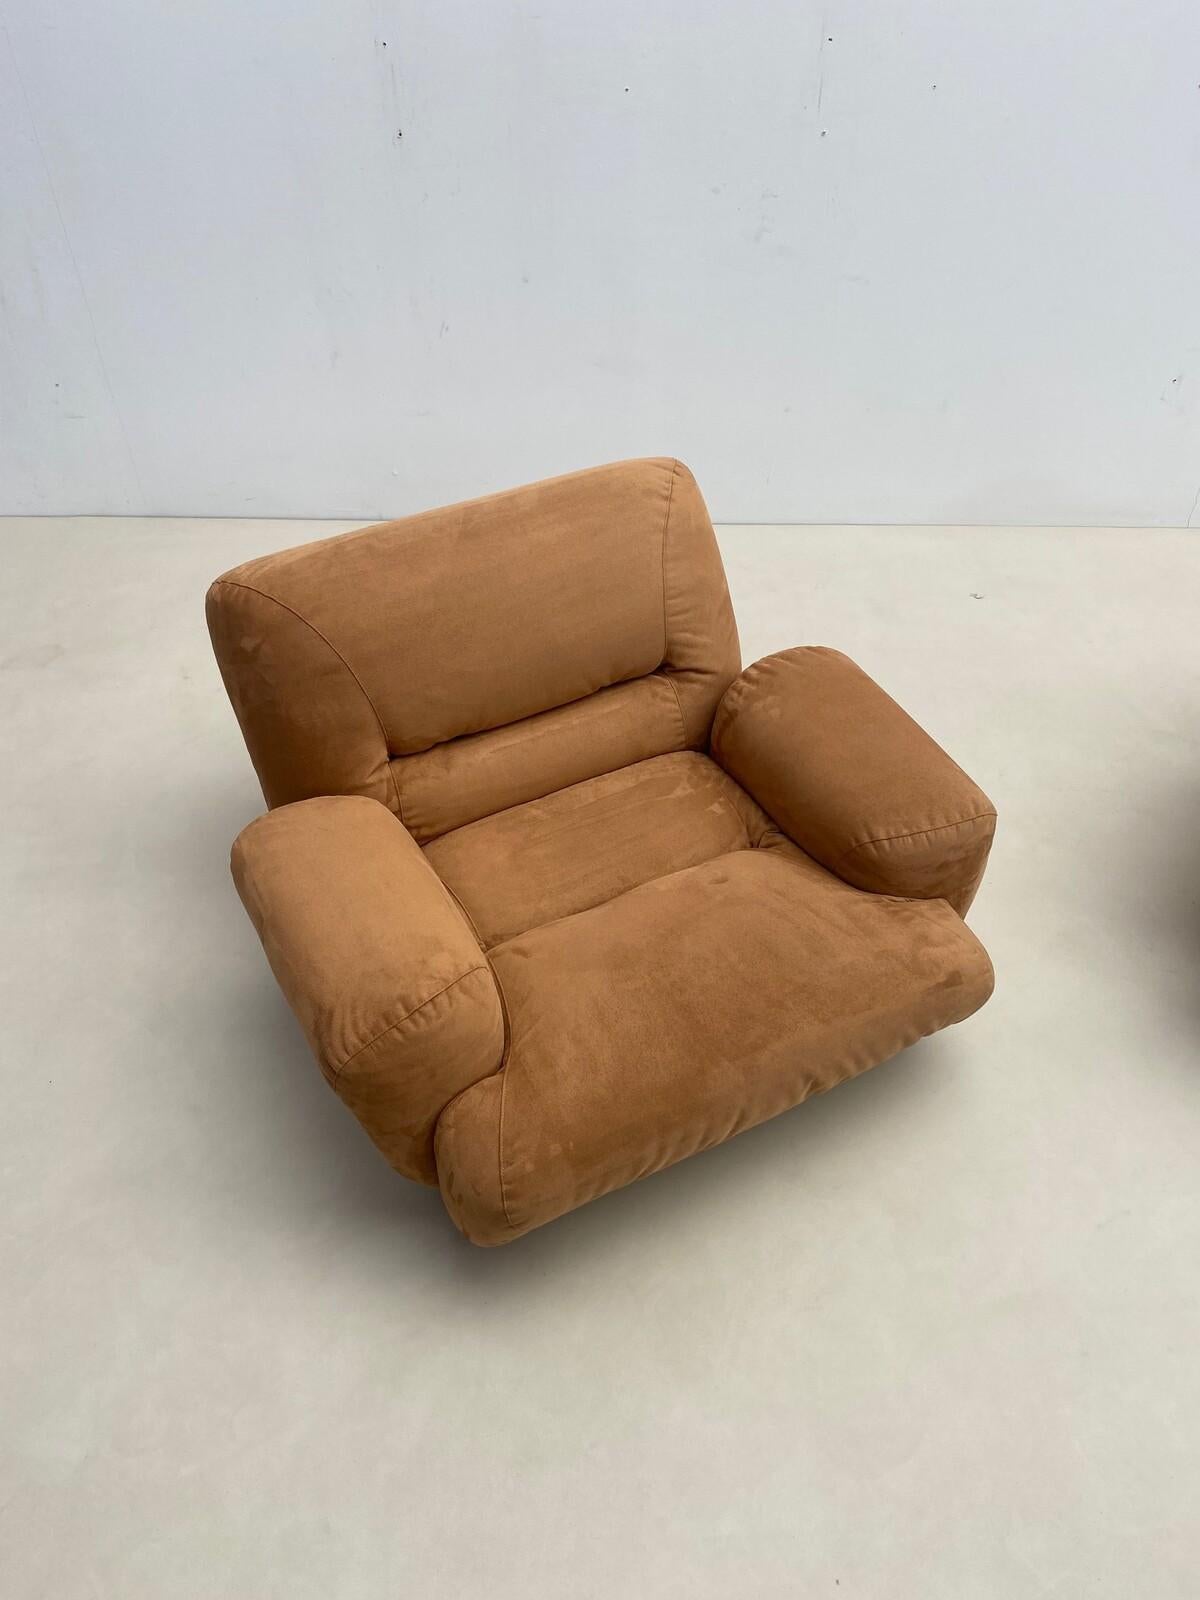 Pair of Mid-Century Modern Nubuck Leather Lounge Chairs, Italy, 1970s In Good Condition For Sale In Brussels, BE